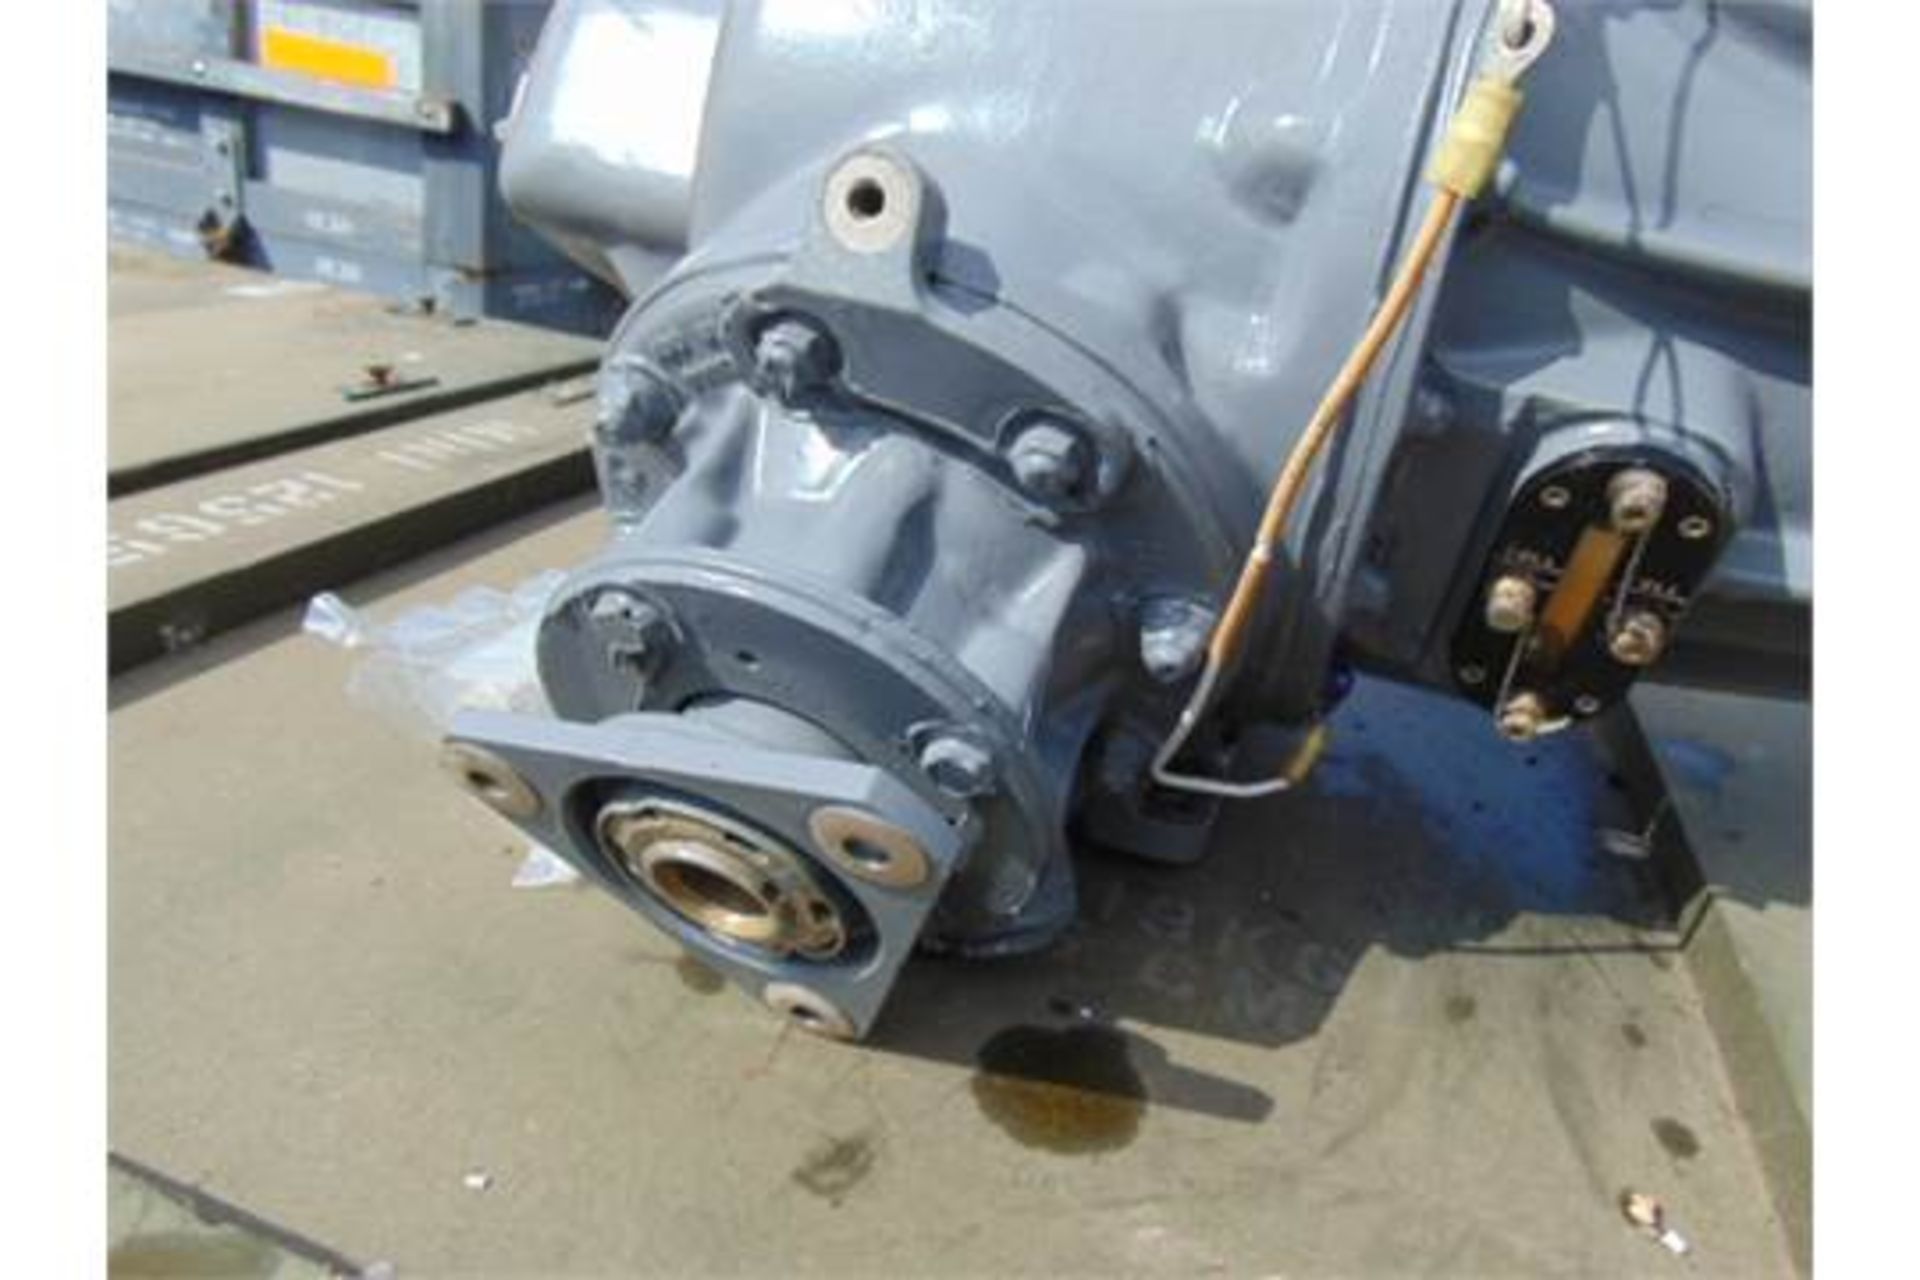 Lynx Helicopter Tail Gearbox Assy - Image 3 of 7